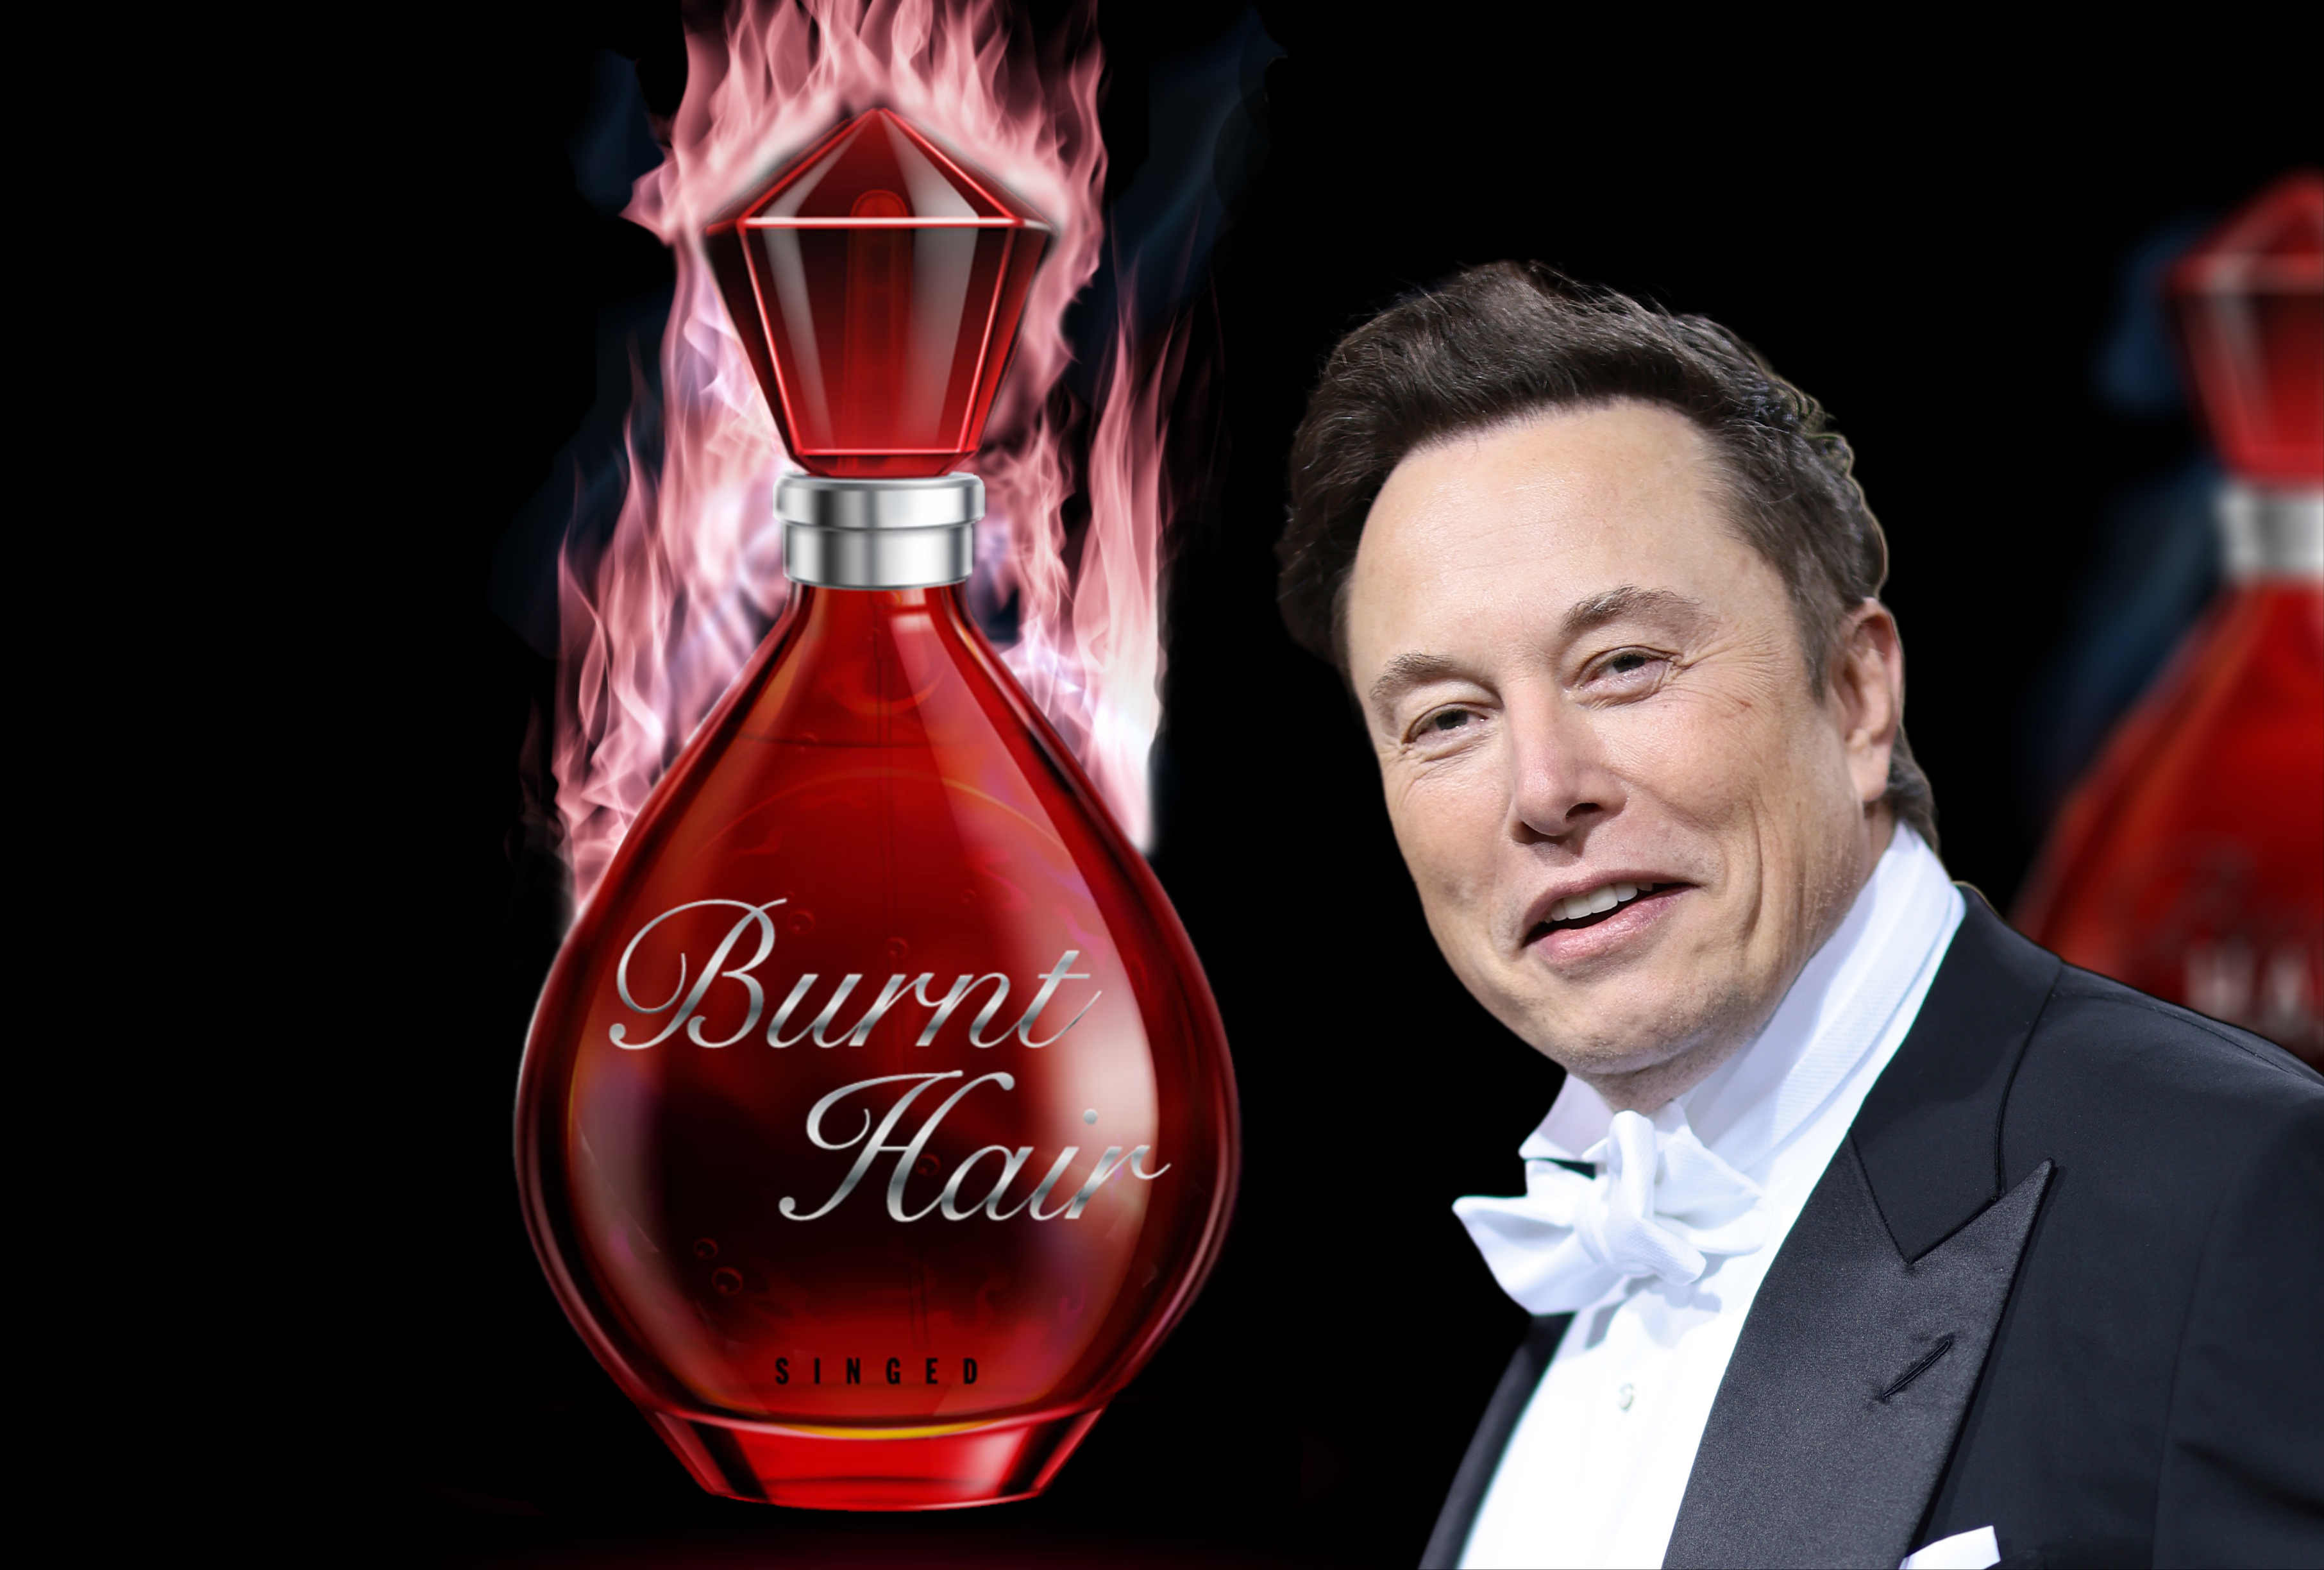 Elon Musk launches perfume called ‘Burnt Hair’, sells 20,000 bottles in few hours